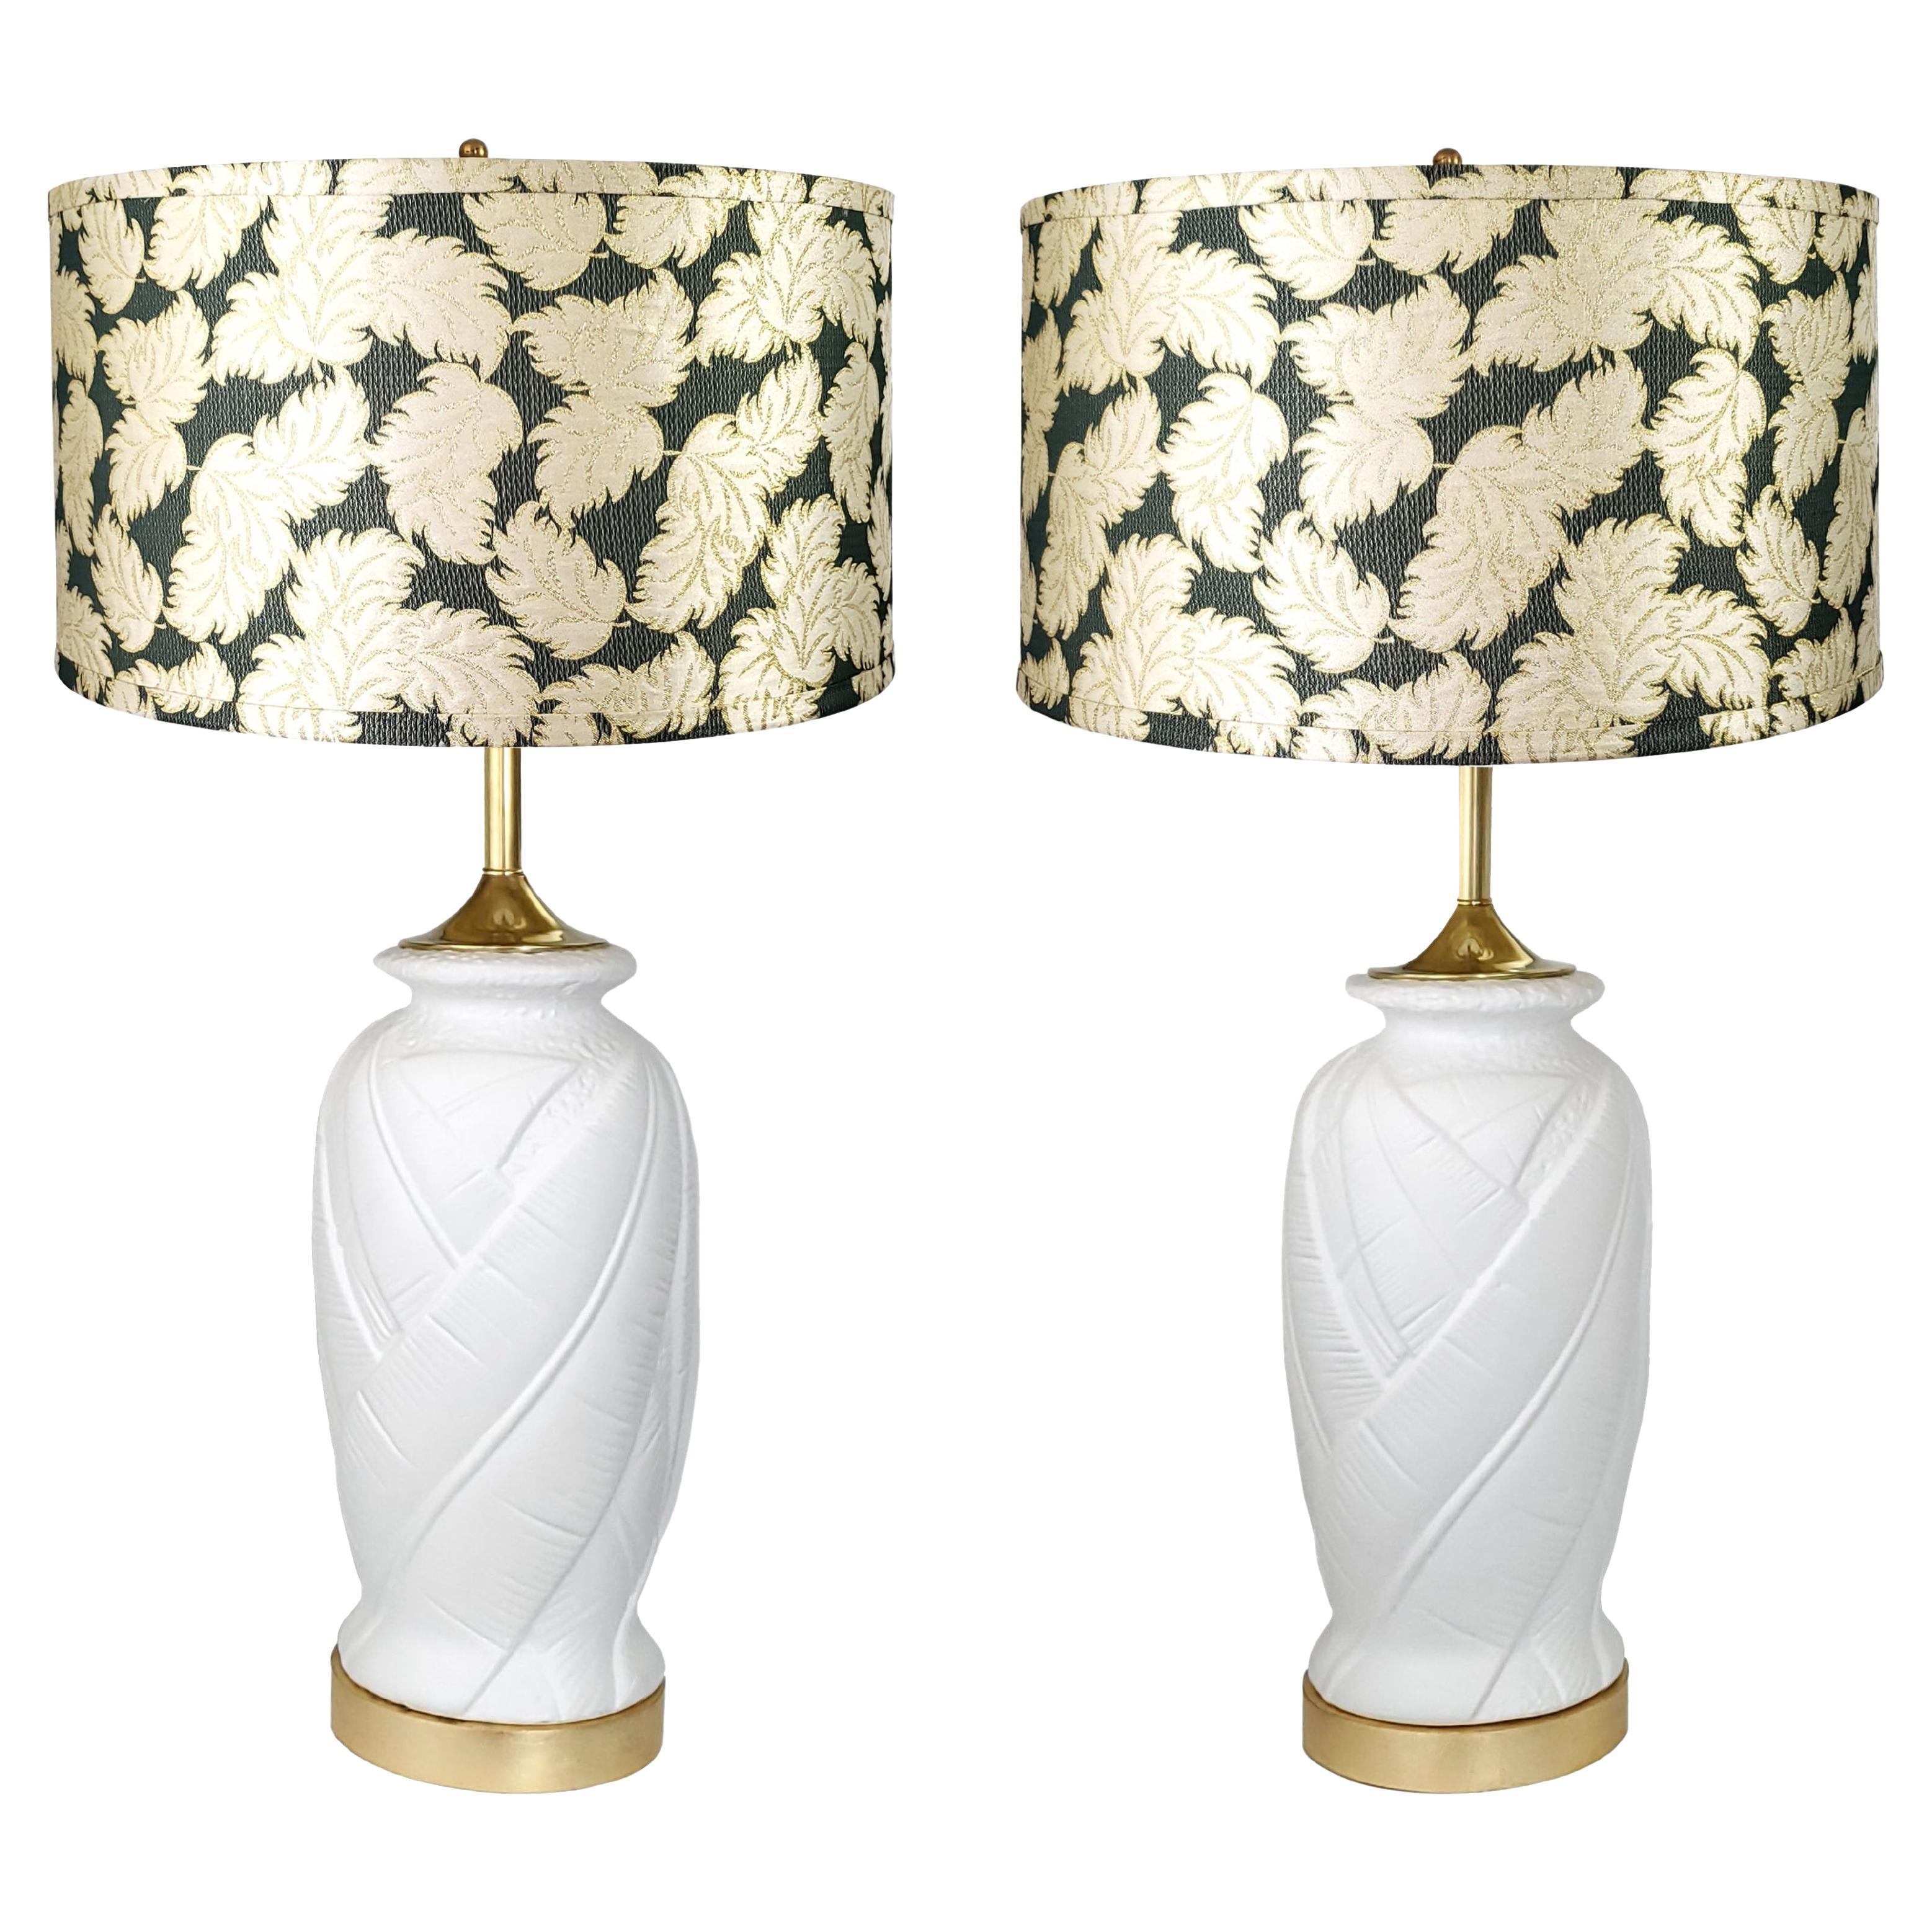 Pair Vintage White Plaster Palm Leaf Table Lamps with Vintage Drum Lamp Shades For Sale